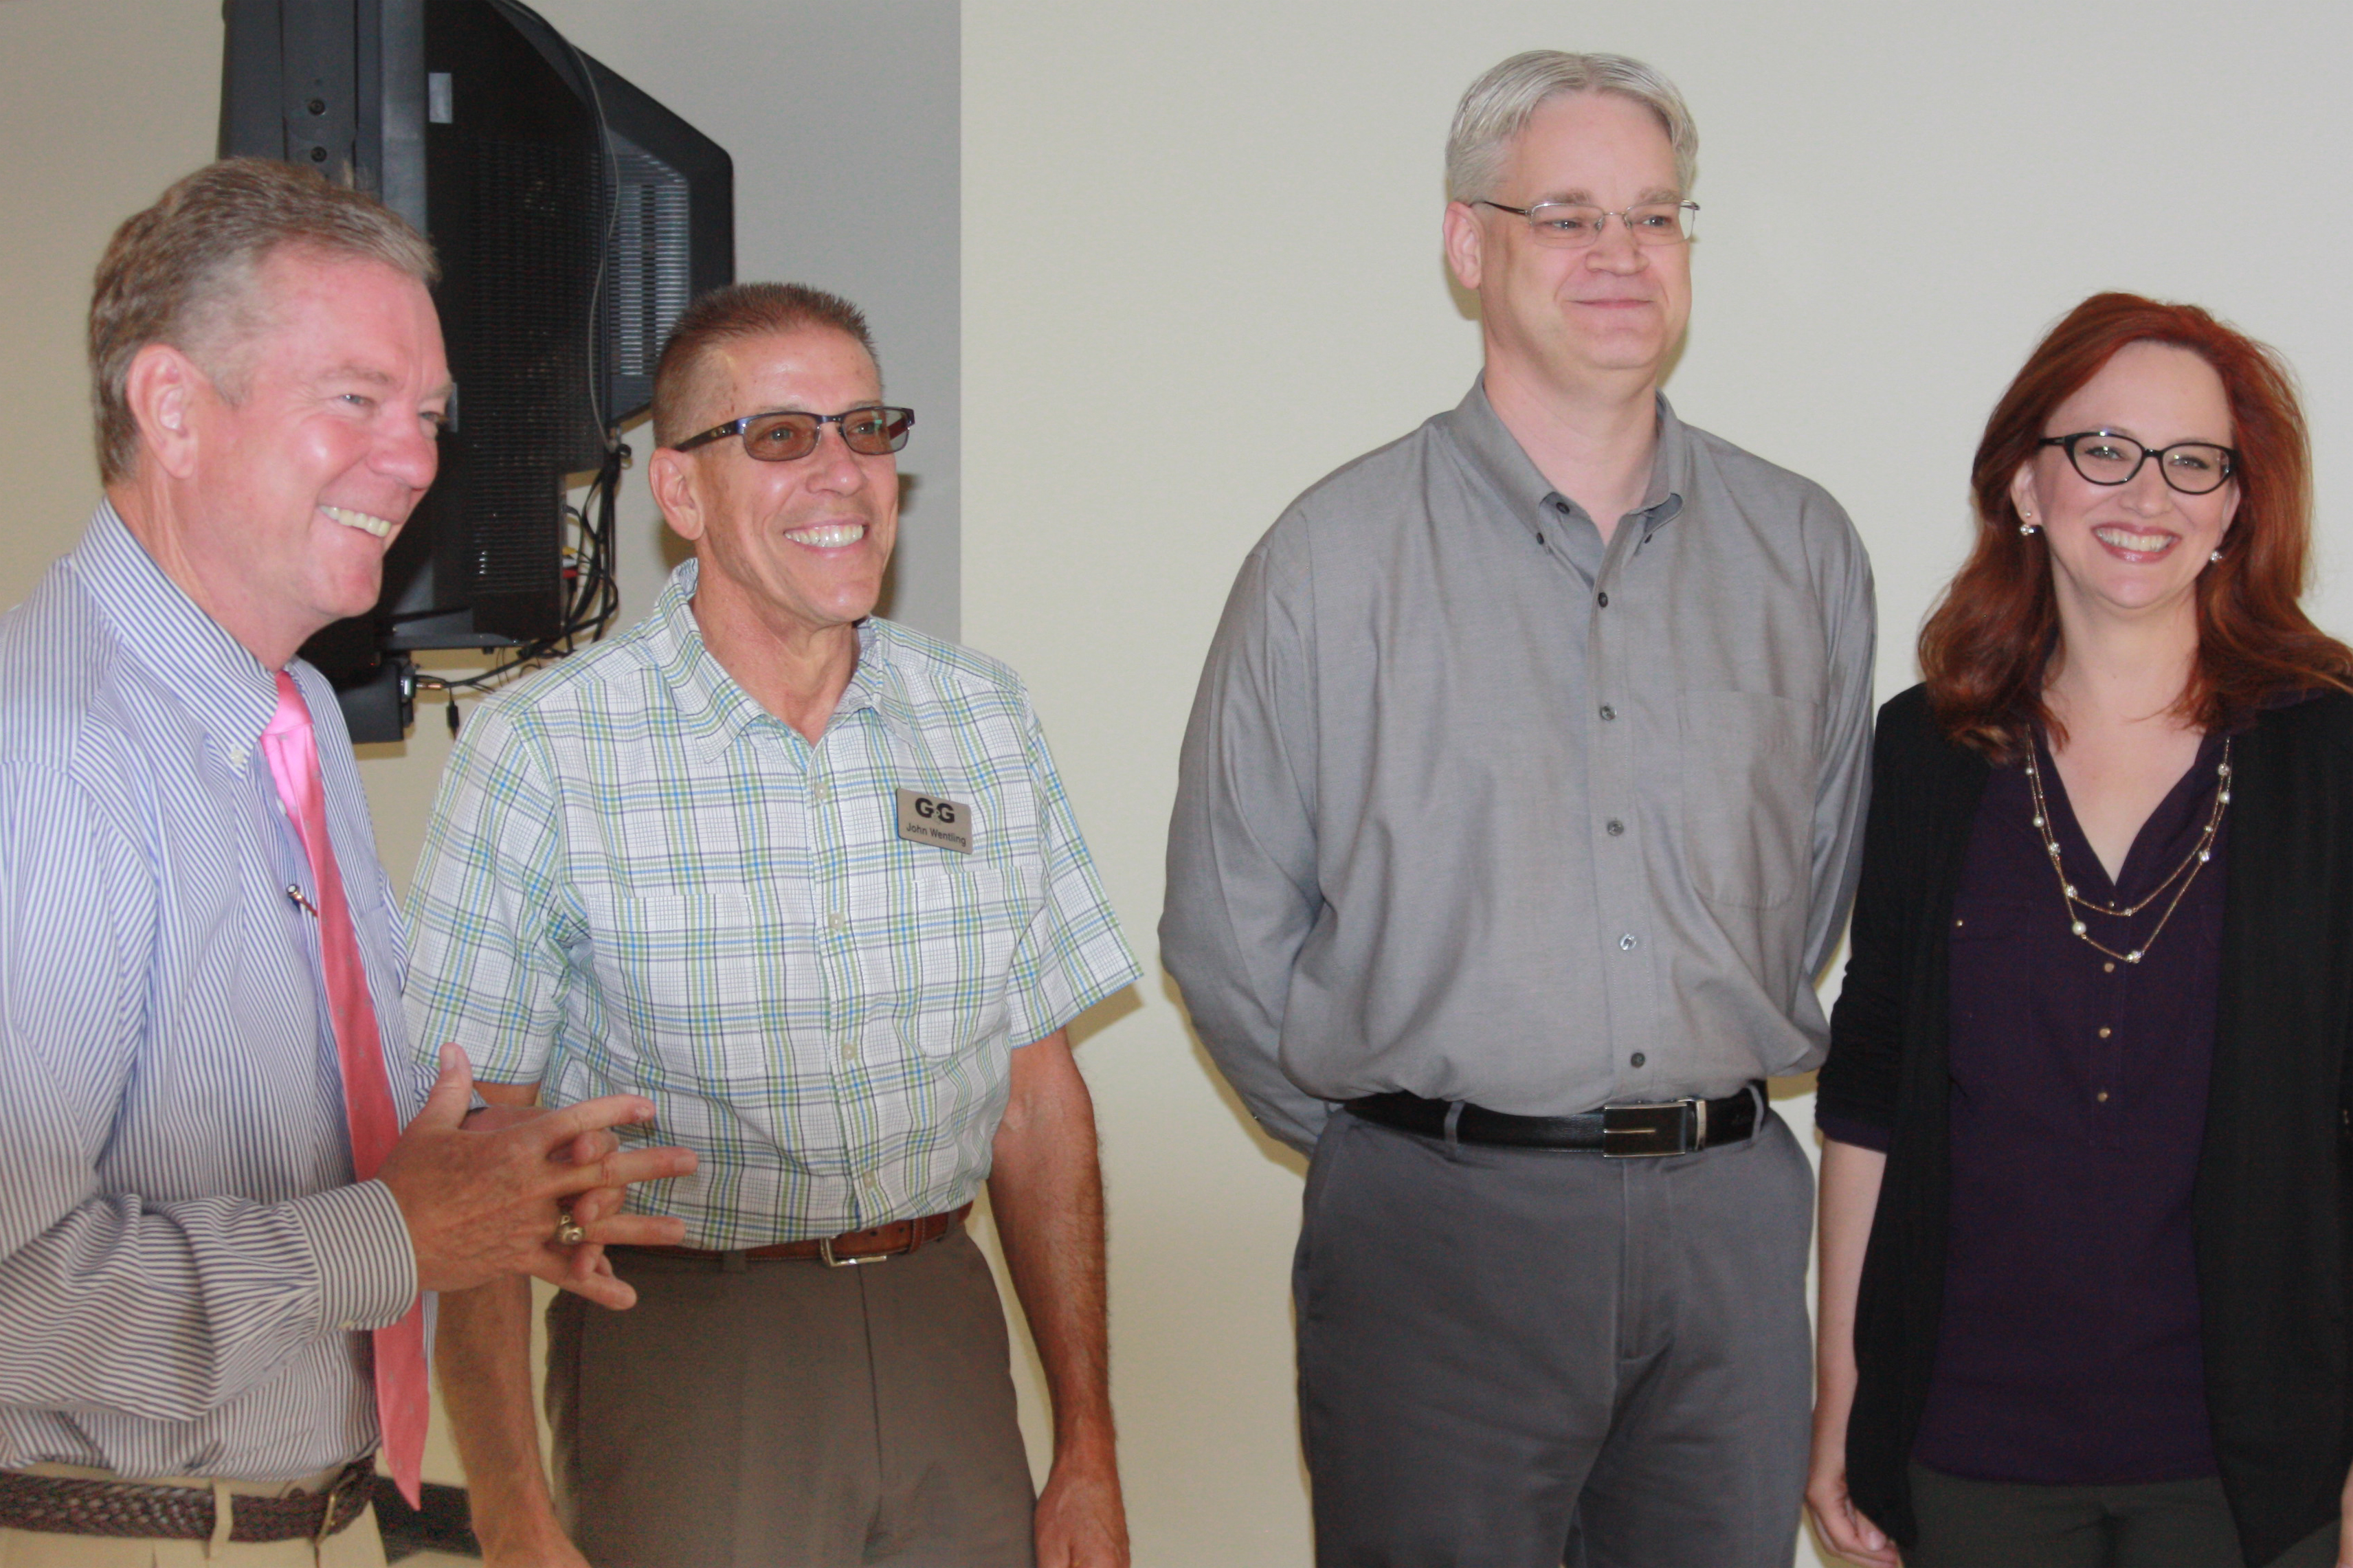 Pictured left to right: Dr. Harold Nolte, DC3 president; John Wentling, owner G&G Car and Truck Supercenters; David Weece, owner Ashley Furniture HomeStore; and Christina Haselhorst, DC3 Foundation director